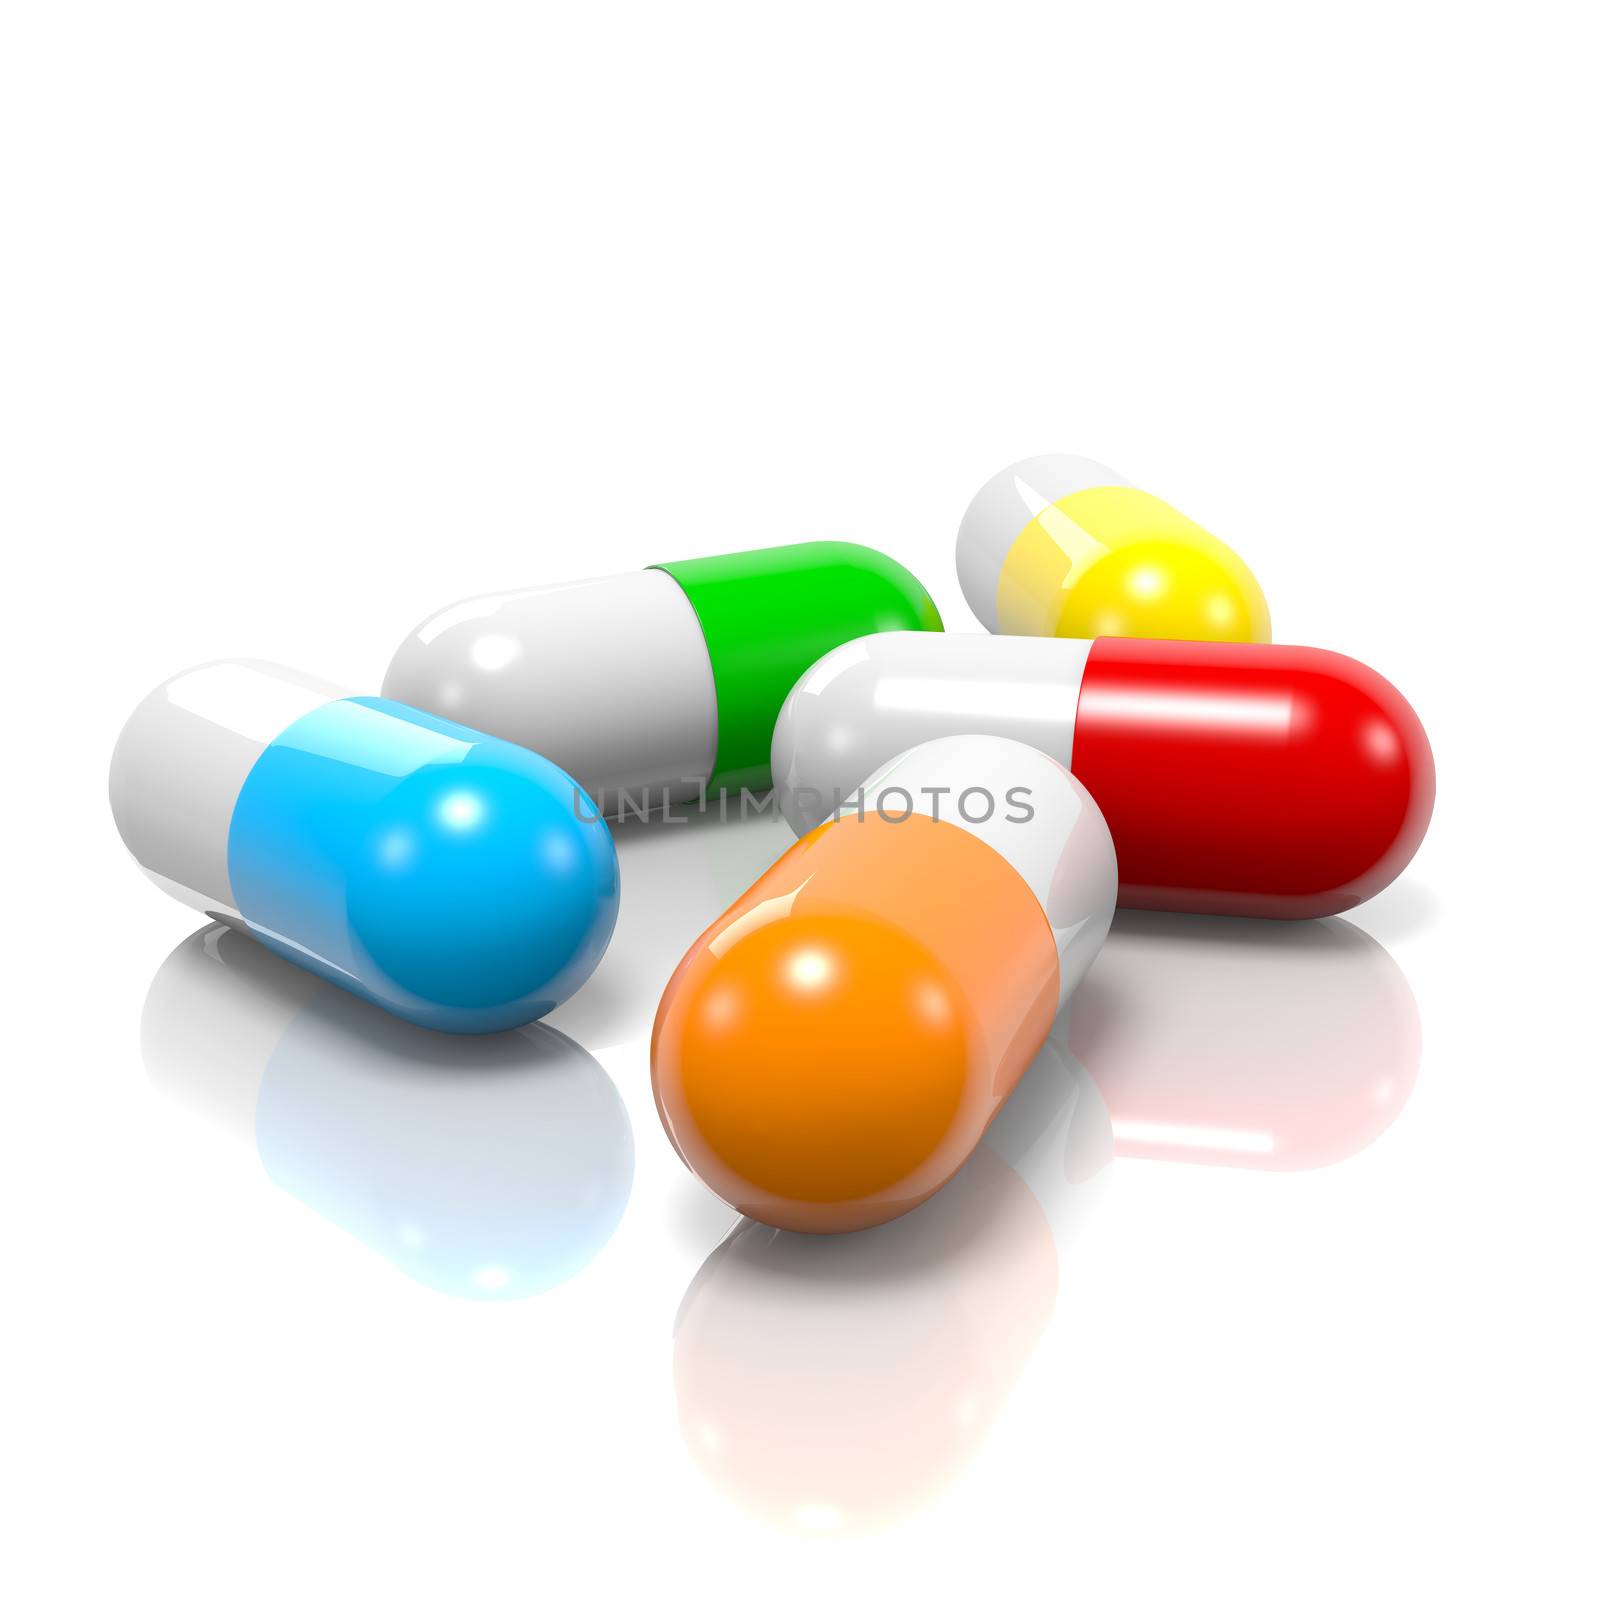 Colorful Pills with Reflection on White Background